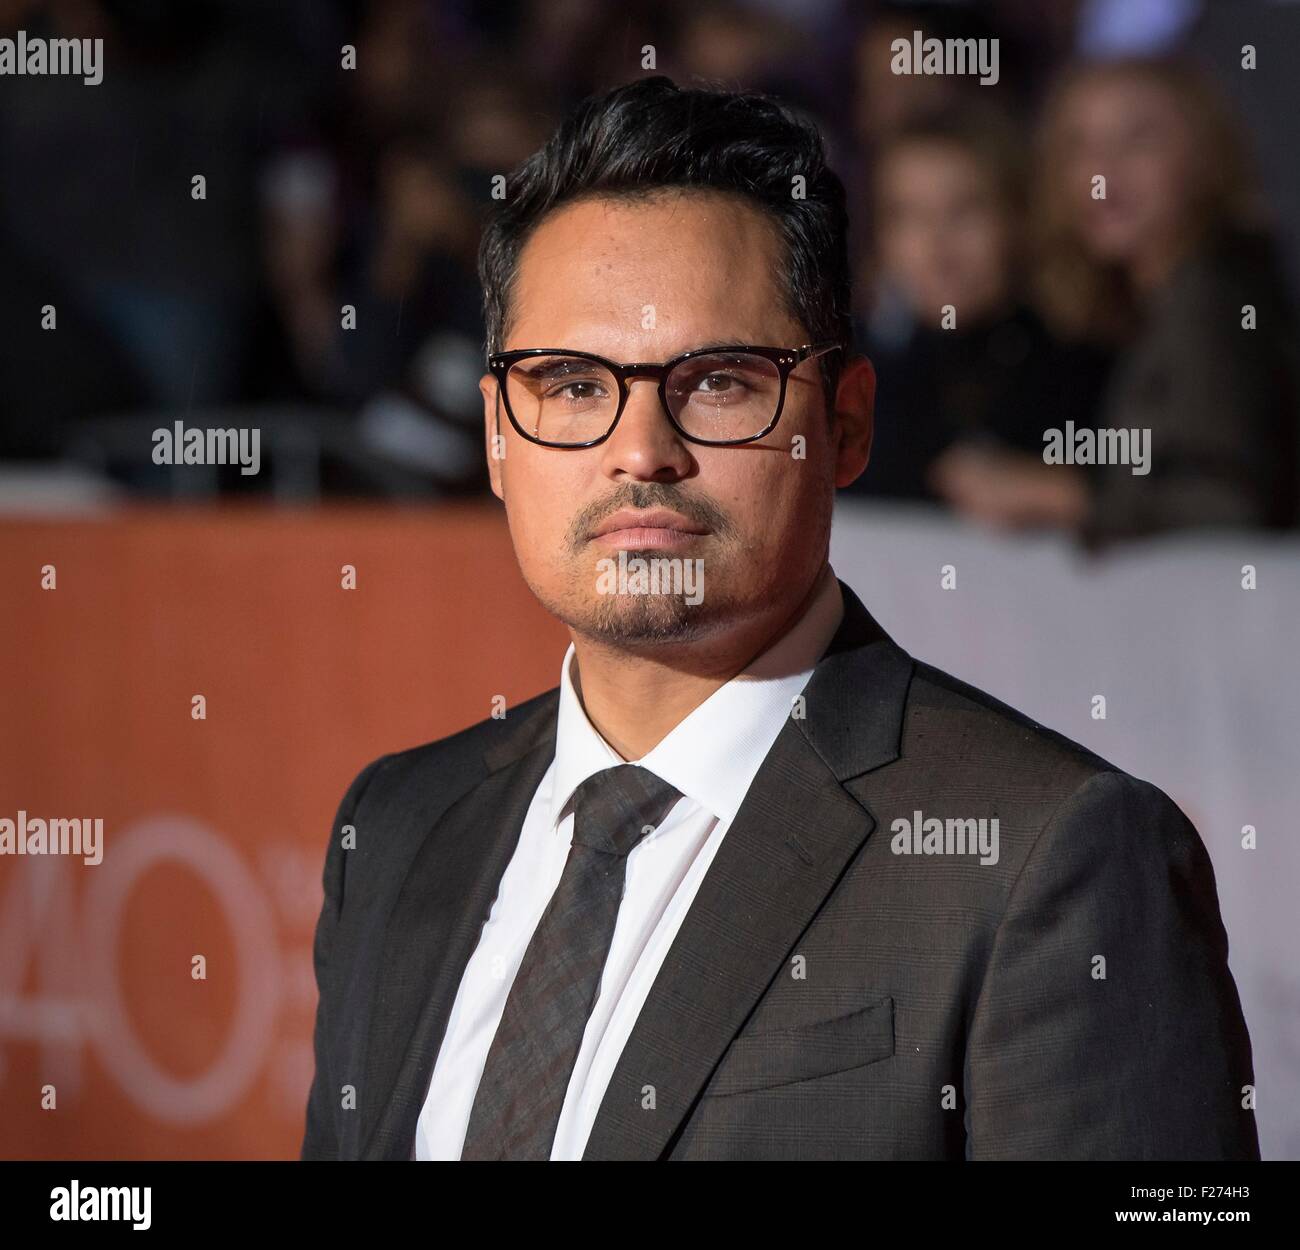 Actor Michael Pena attends the world premiere for The Martian at the Toronto International Film Festival at the Roy Thomson Hall September 11, 2015 in Toronto, Canada. Stock Photo